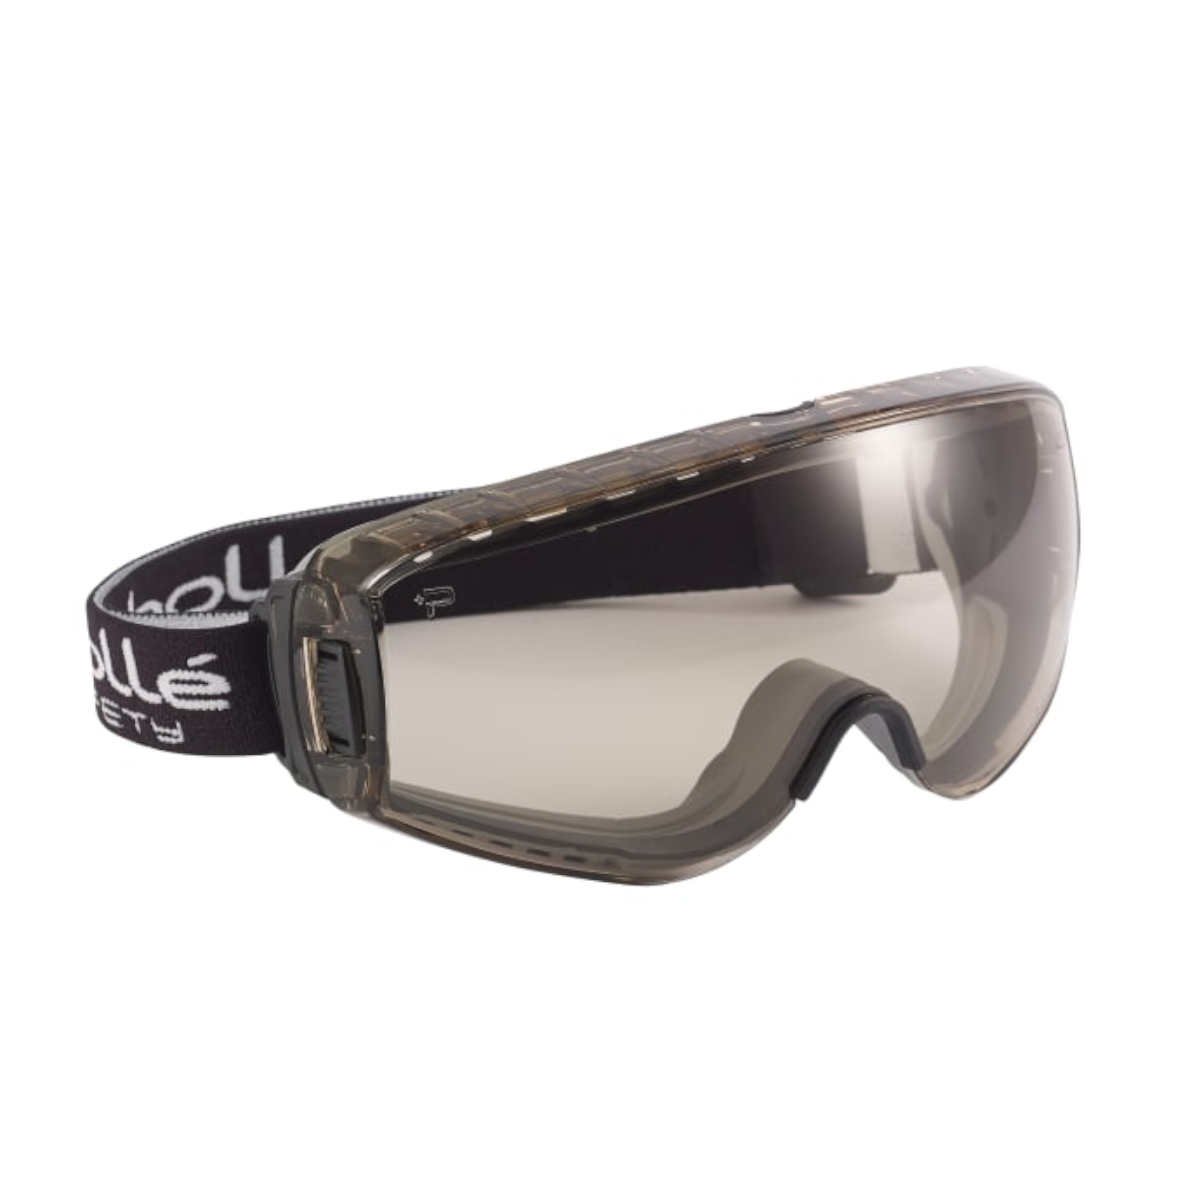 Smoke Bolle PILOPPSF Pilot Ventilated Safety Goggles 